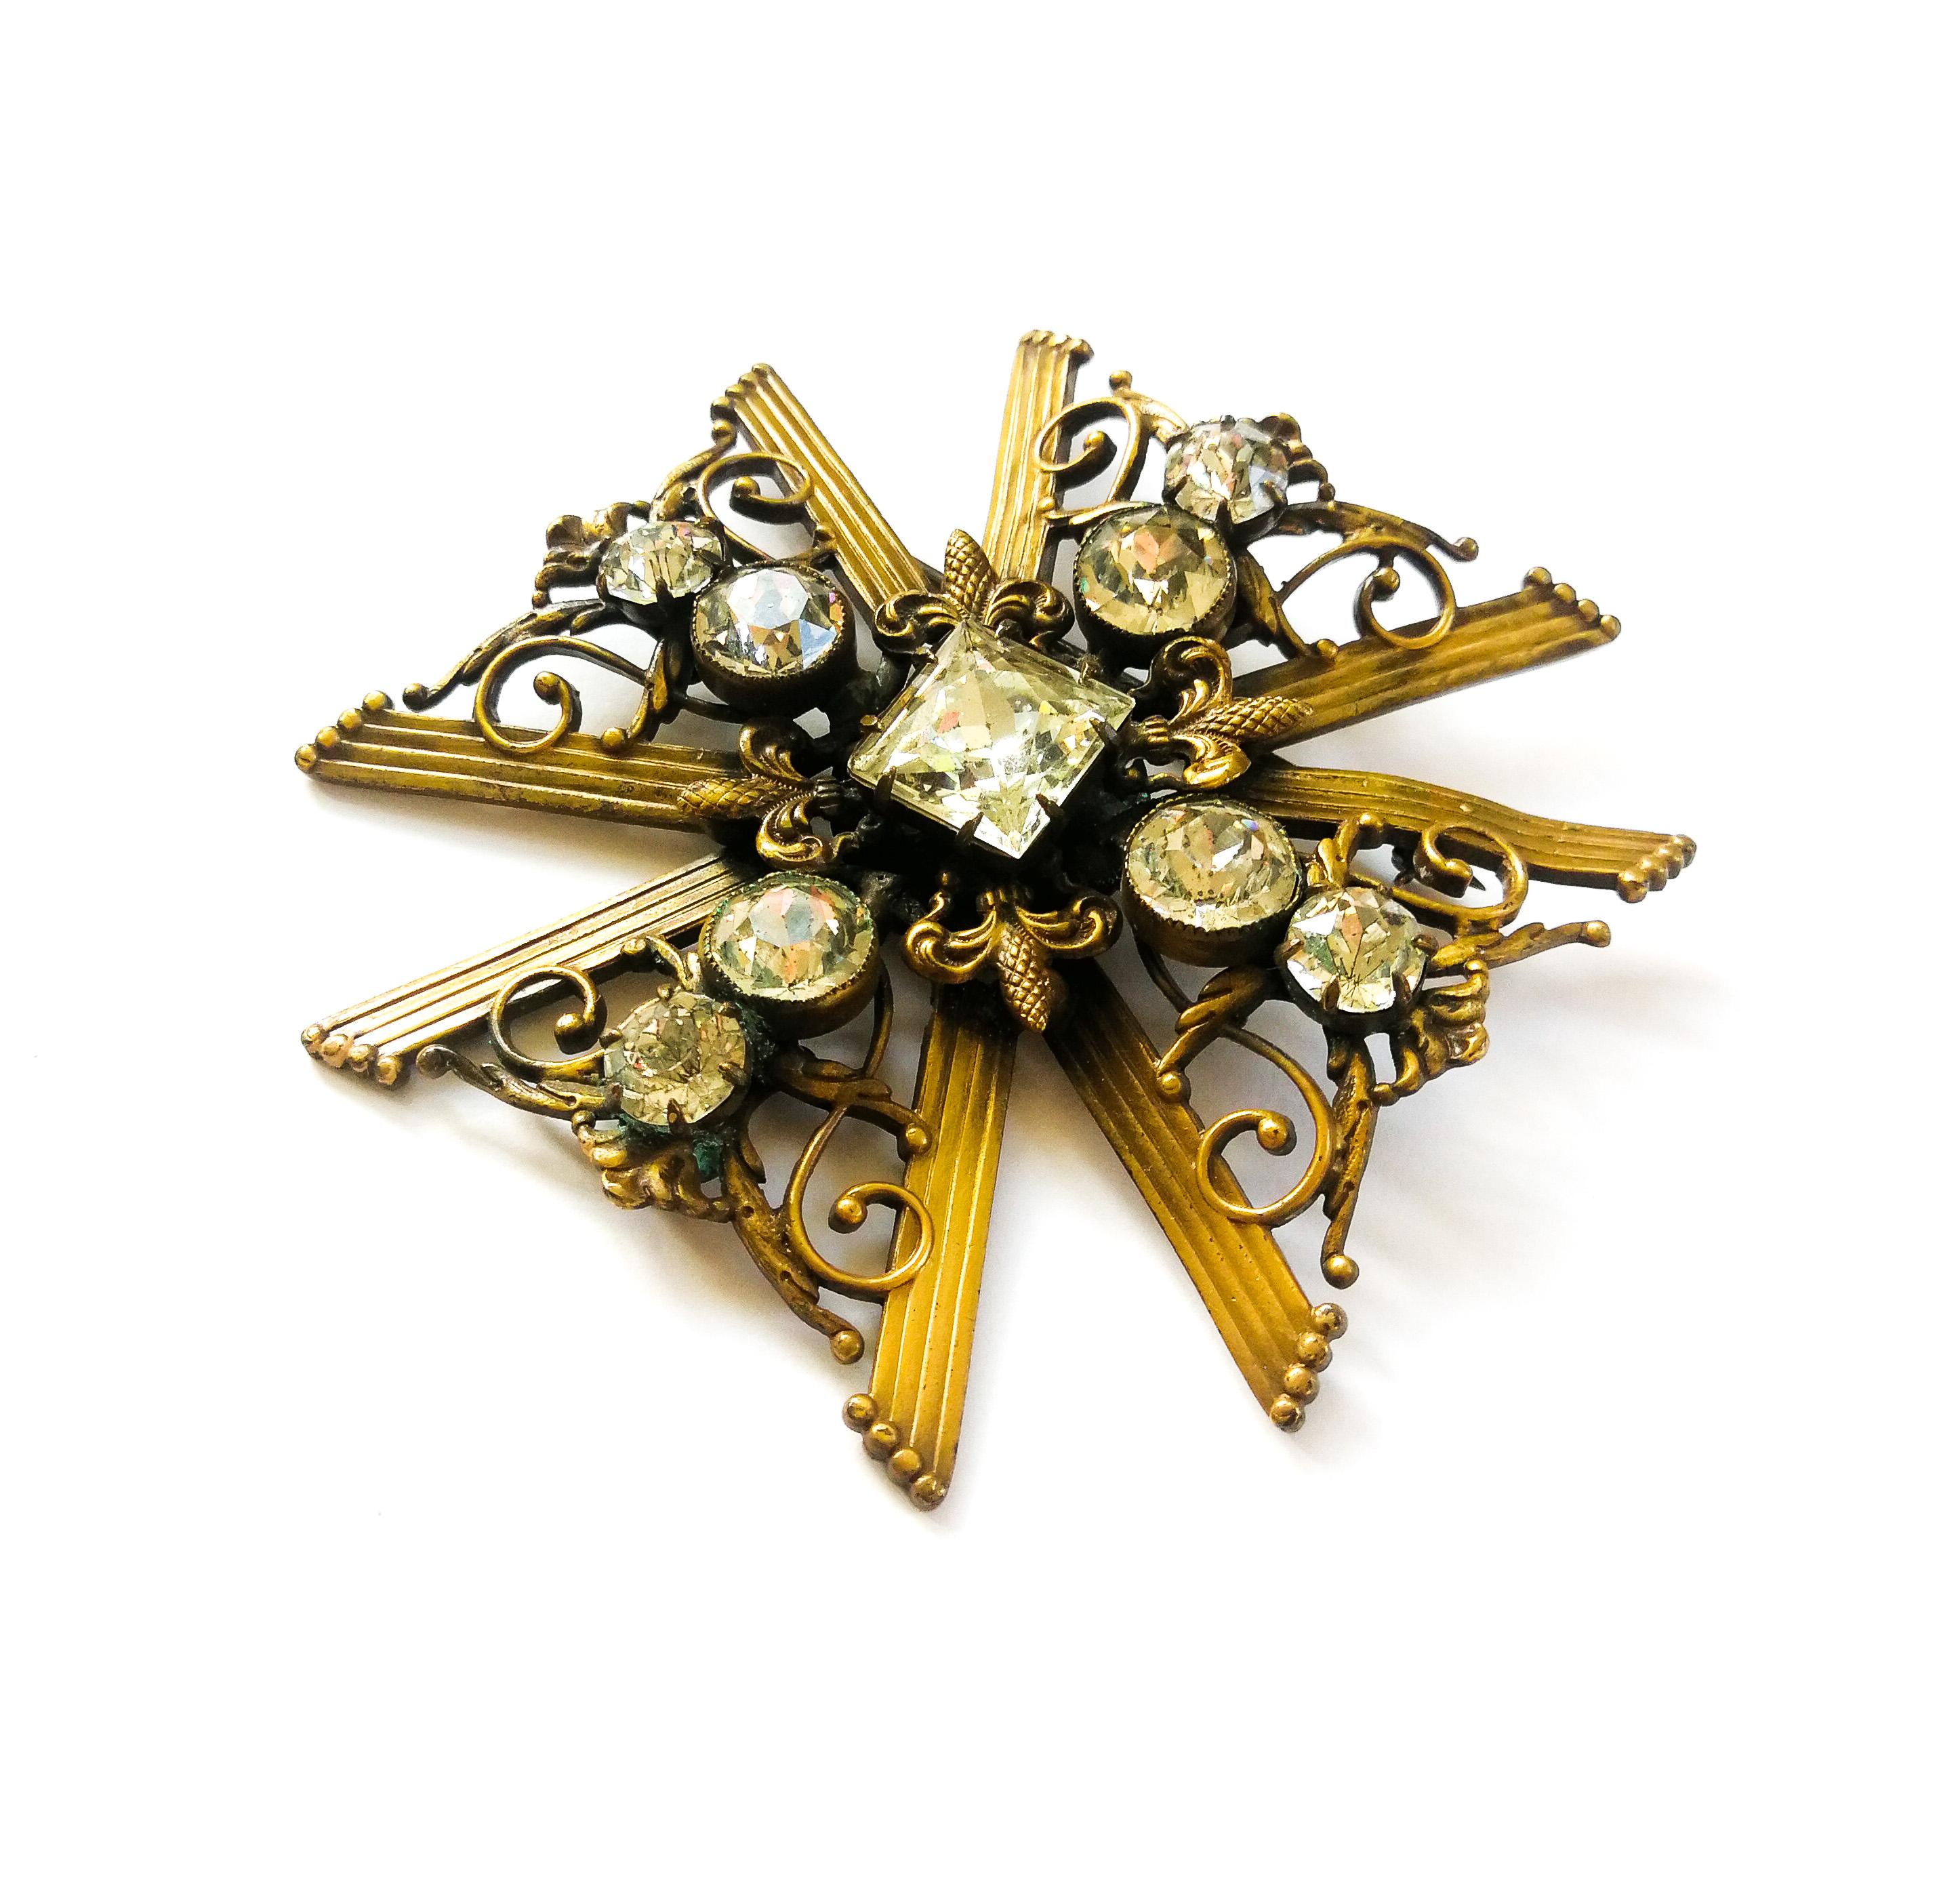 A charming and stylish brooch from Joseff of Hollywood,  in the shape of a Maltese Cross, made from Joseff's signature 'Russian' gilded metal and round and square cut pastes. With the metal formed in scrolls and the ribbed arms of the cross, four